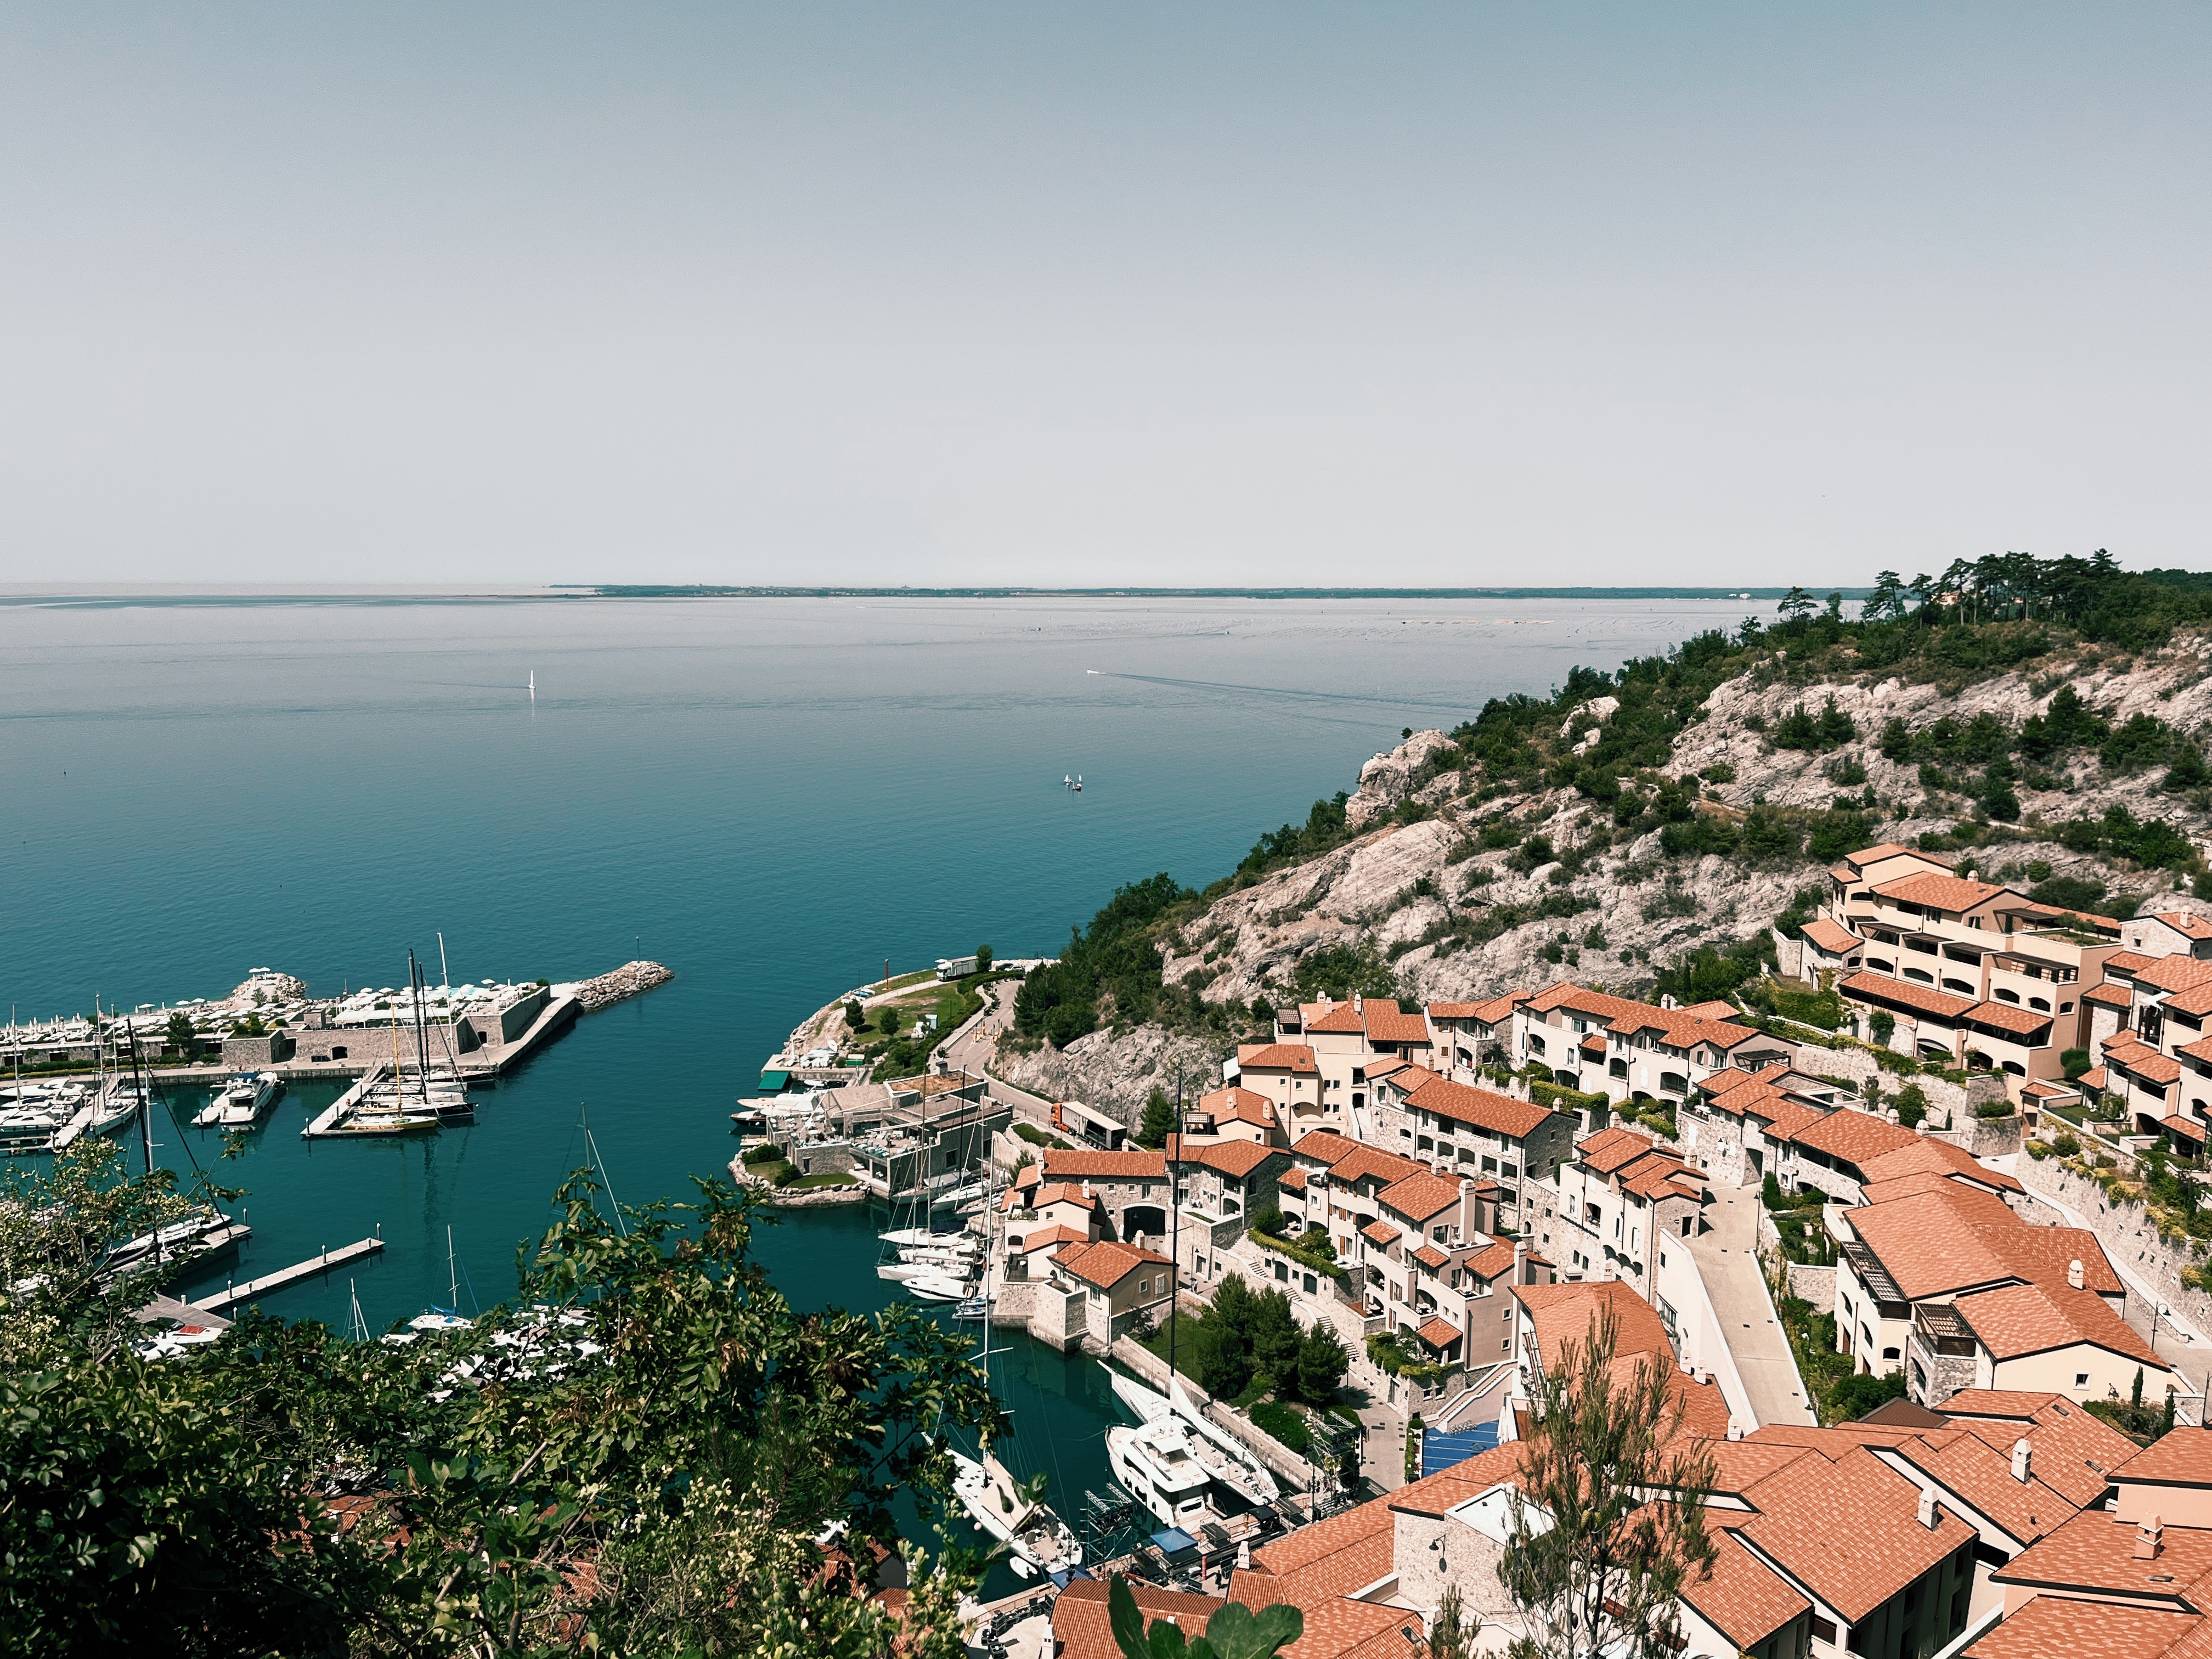 Village on Adriatic Coast with Sea in the Back seen from the Alpe Adria Trail